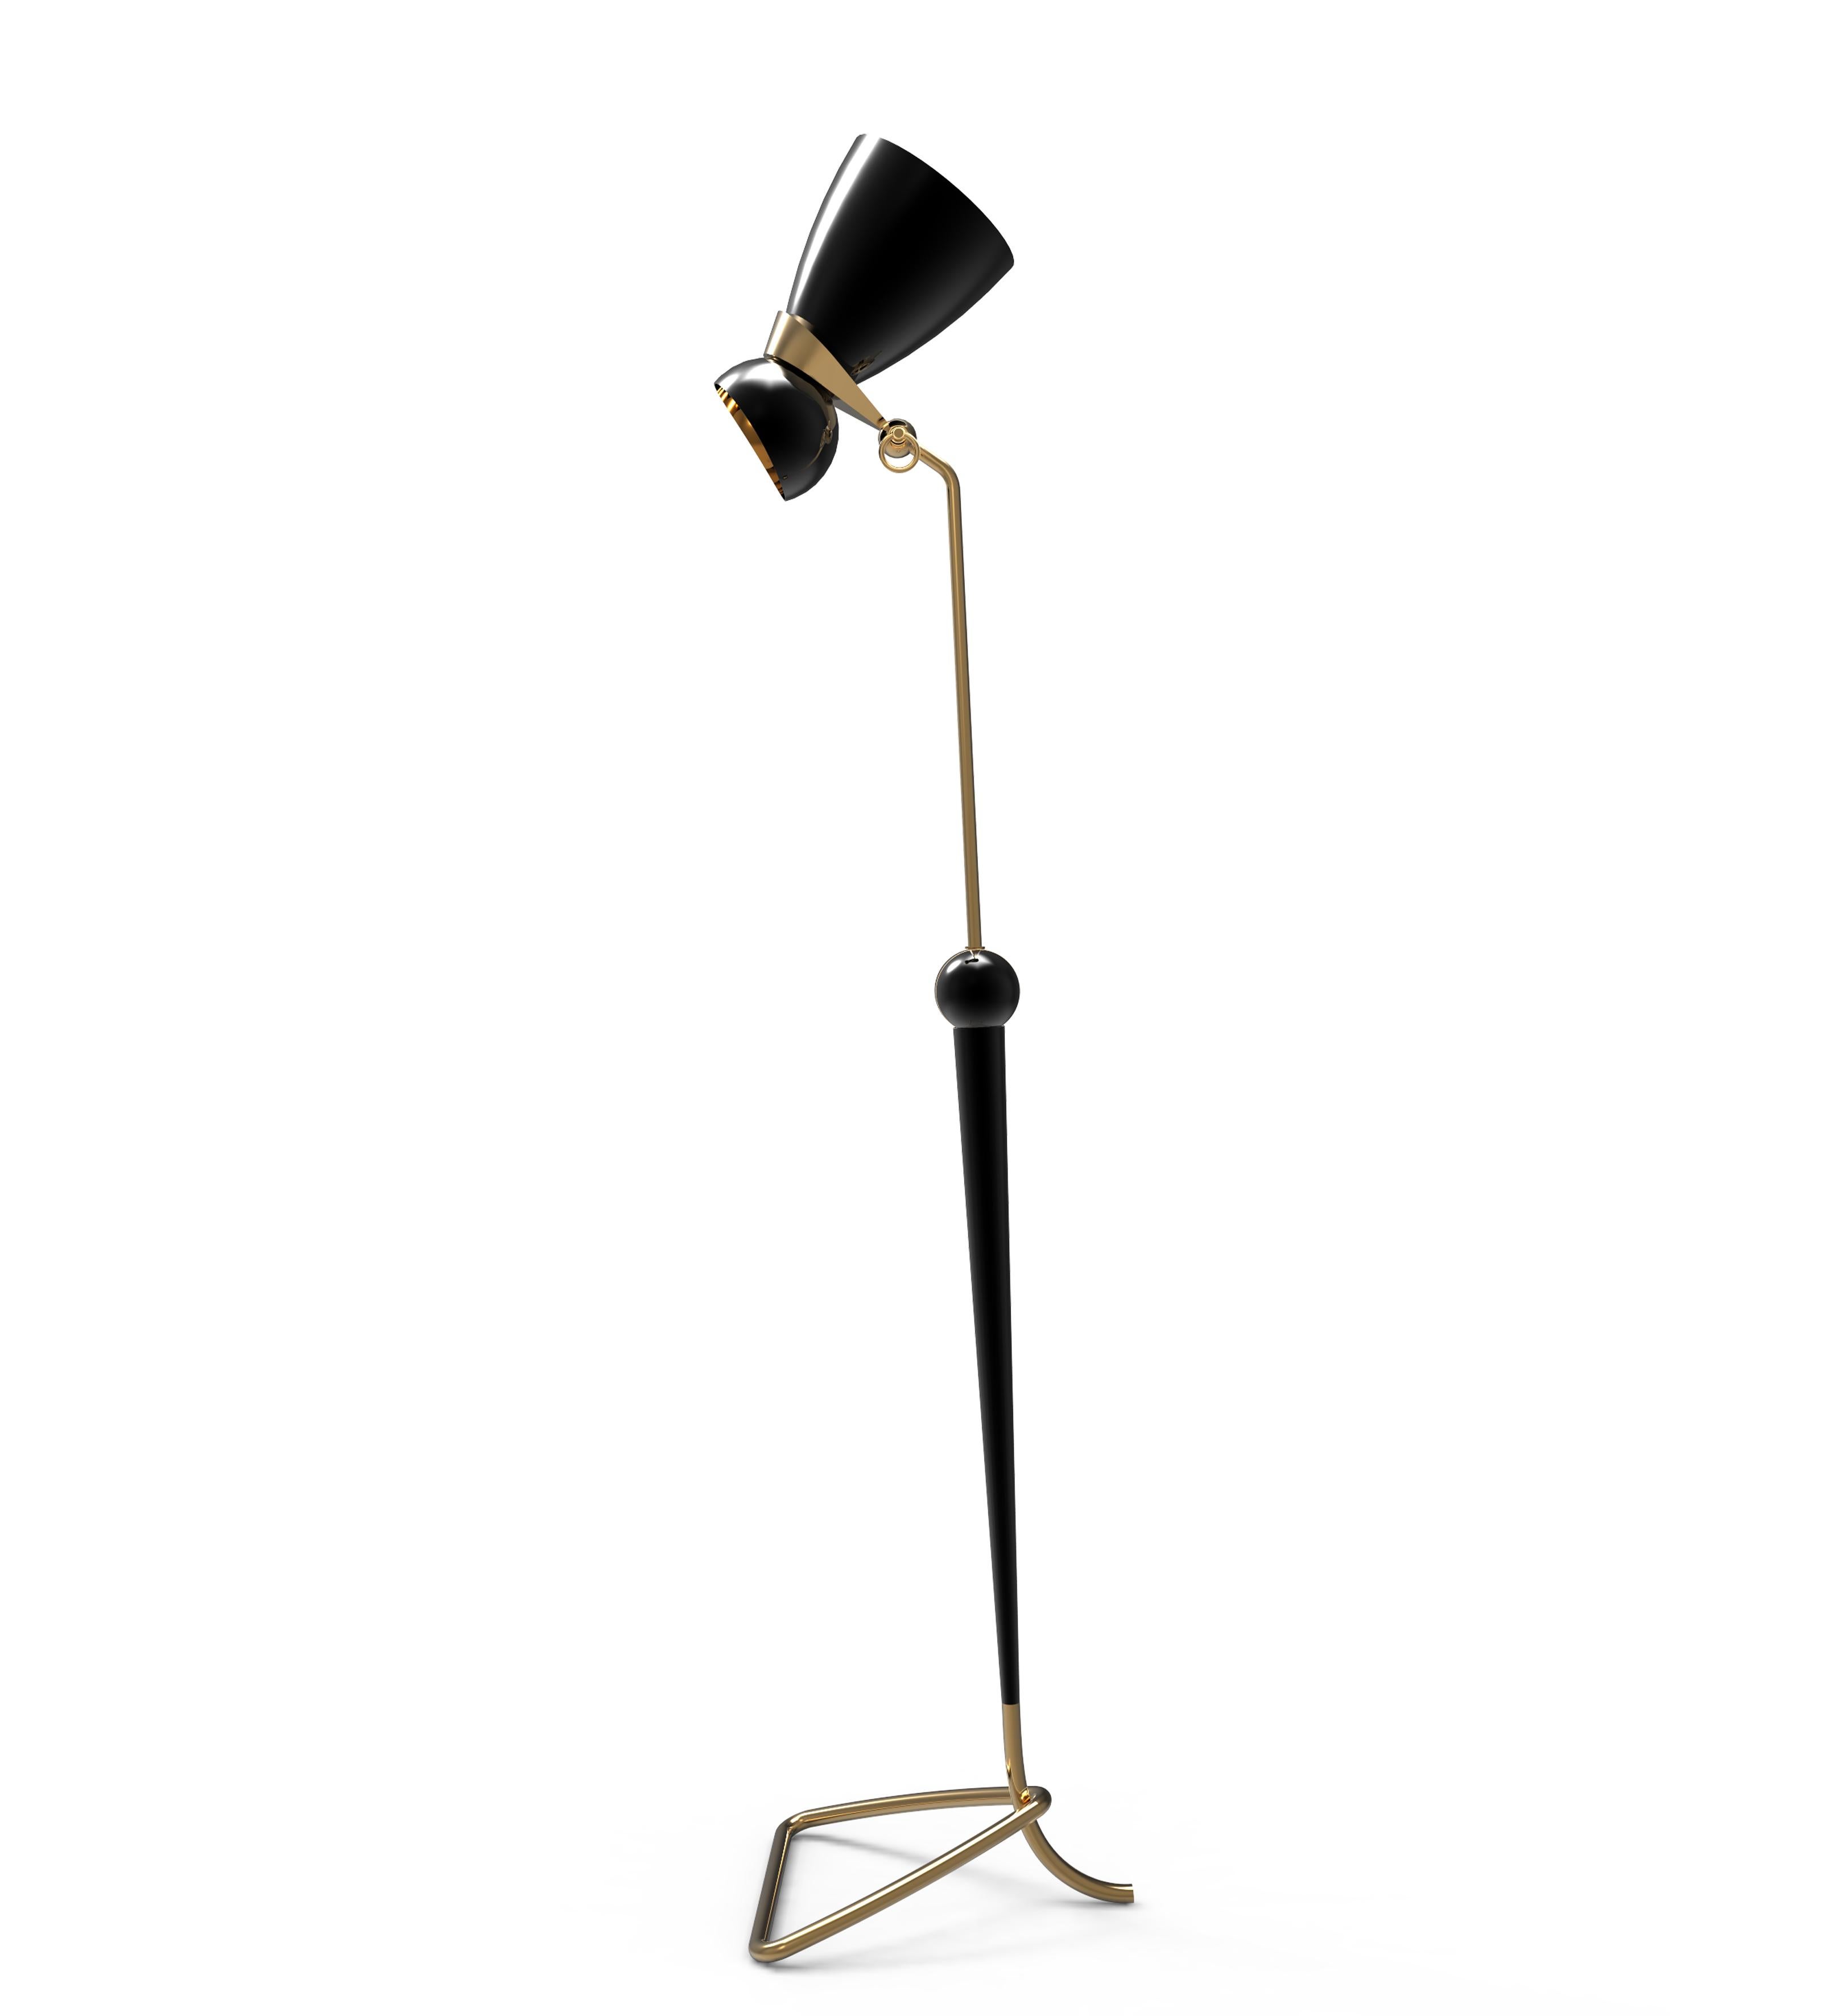 Amy vintage floor lamp was inspired by the great jazz singer and songwriter: Amy Wine house. Amy has a vintage retro style that embodies the soul of the British artist and the 1950s interior design style. With a glossy black lamp shade that bears a